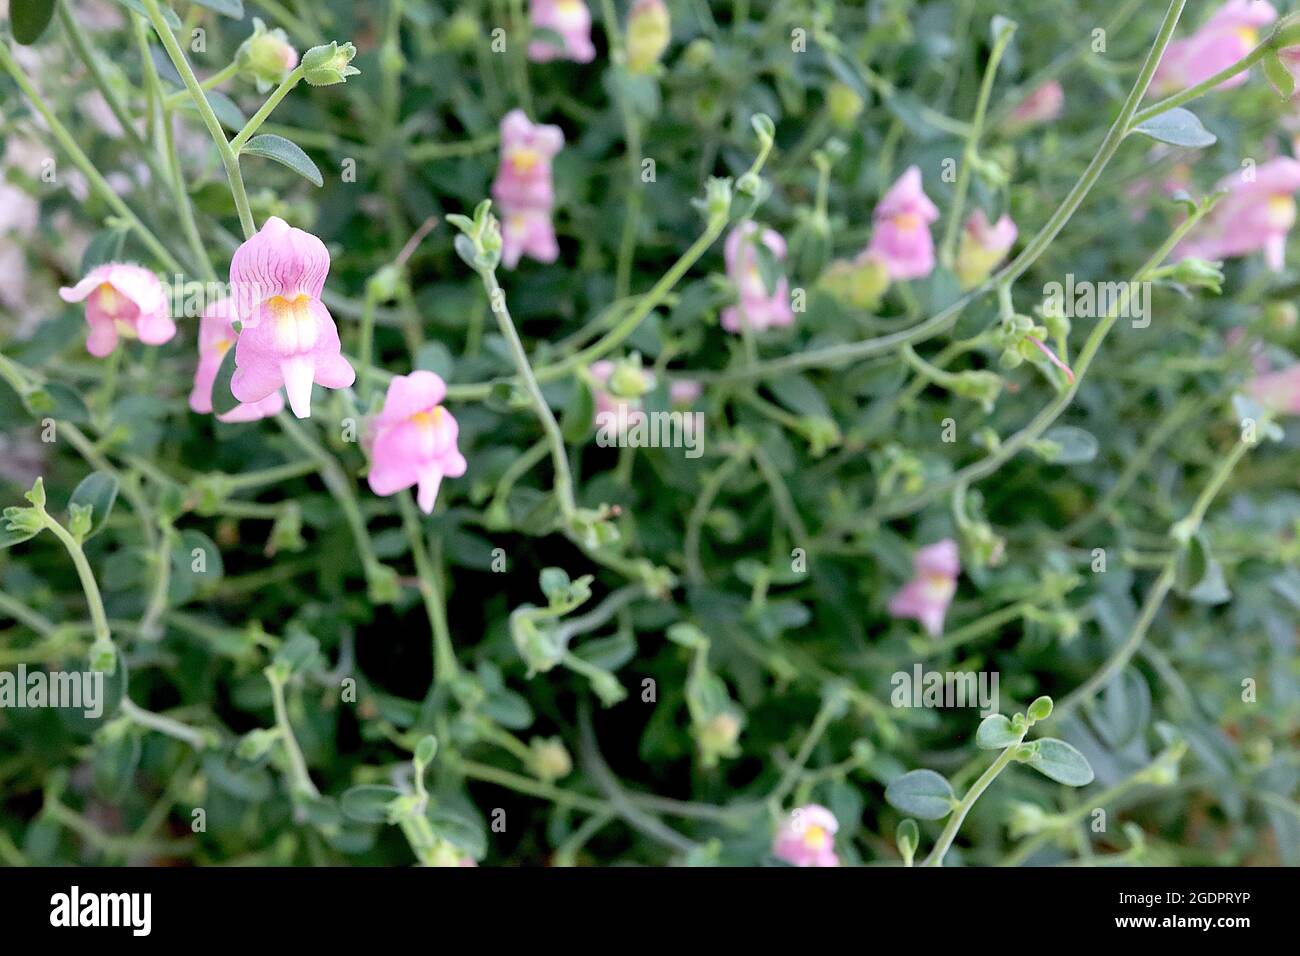 Antirrhinum charidemi snapdragon Charidemi – widely spaced clusters of medium pink flowers with purple veins and yellow white palate,  July, England, Stock Photo